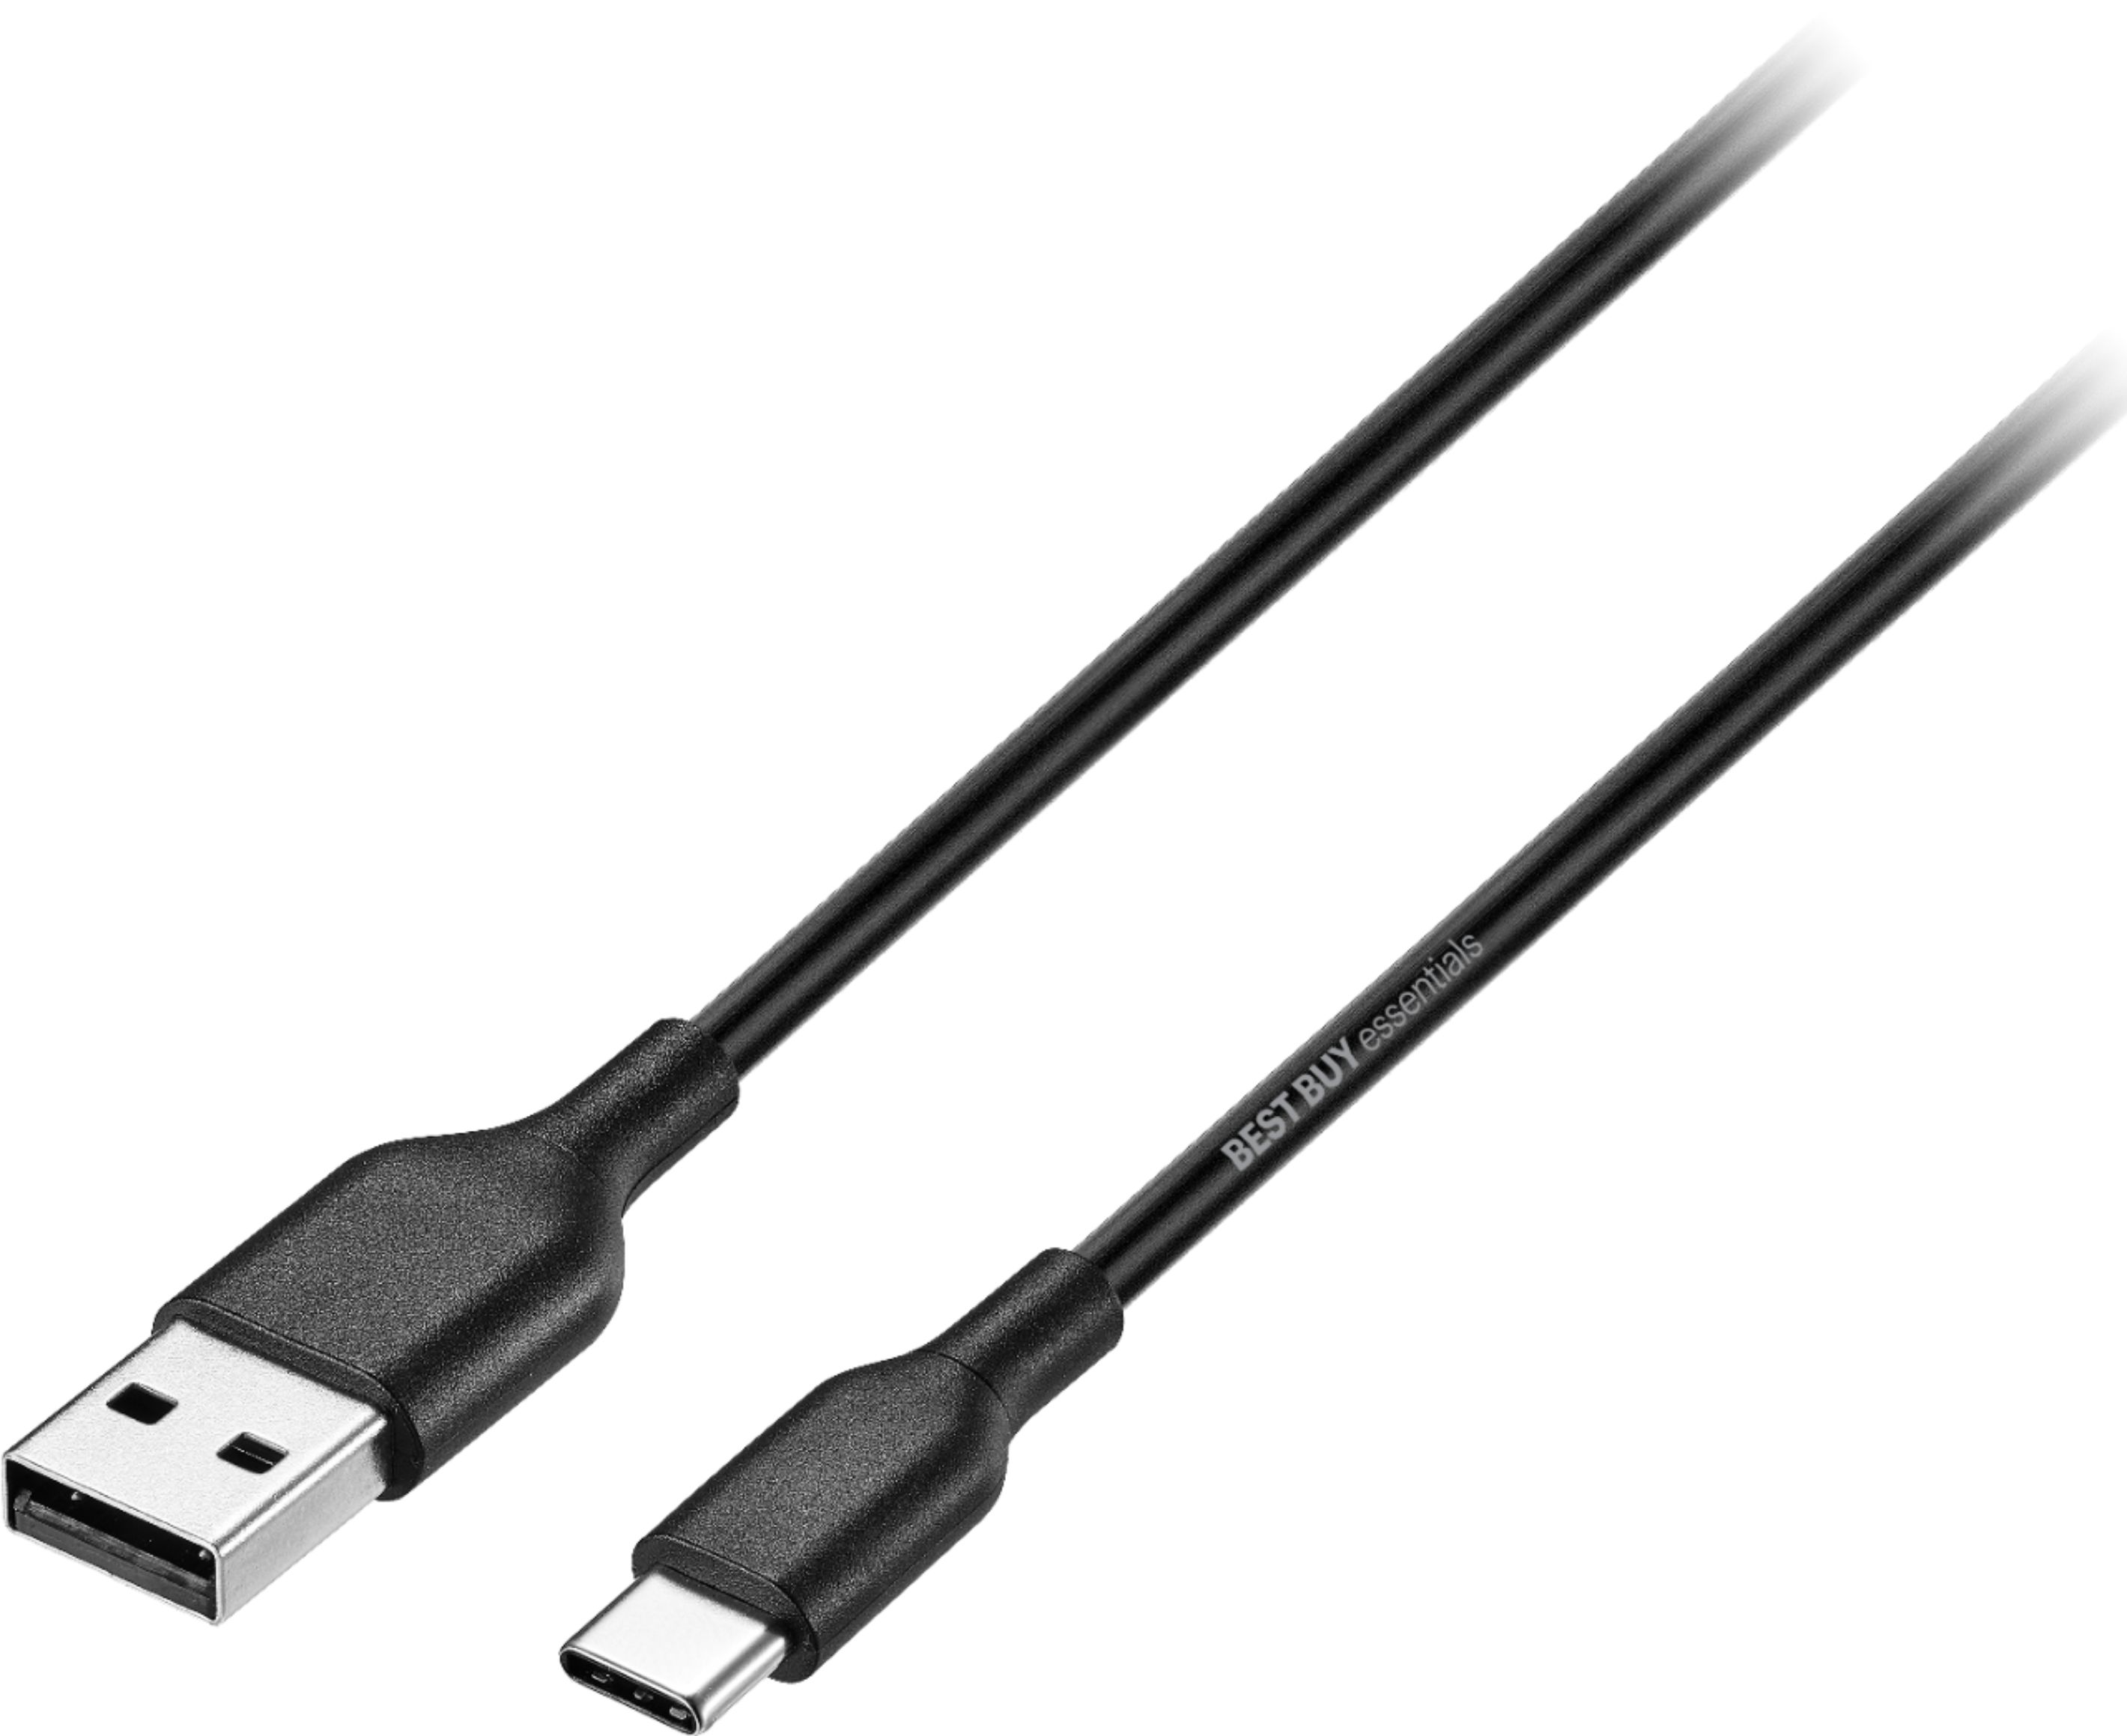  reMarkable - 3´ USB-C to USB-C Cable for Your Paper